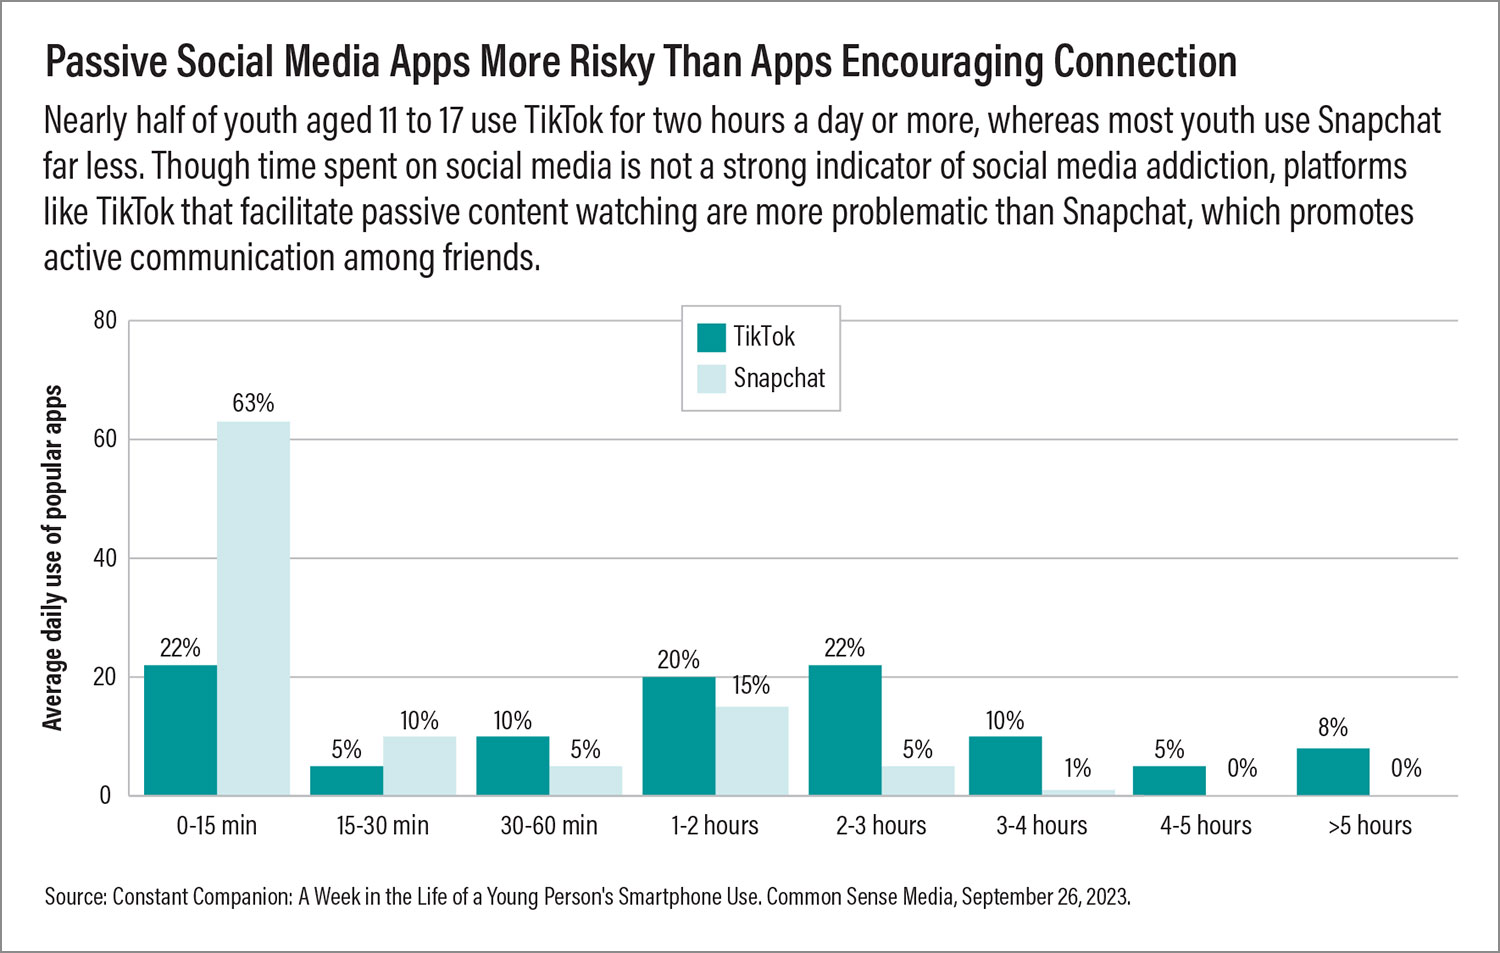 Nearly half of youth aged 11 to 17 use TikTok for two hours a day or more, whereas most youth use Snapchat far less. Though time spent on social media is not a strong indicator of social media addiction, platforms like TikTok that facilitate passive content watching are more problematic than Snapchat, which promotes active communication among friends.